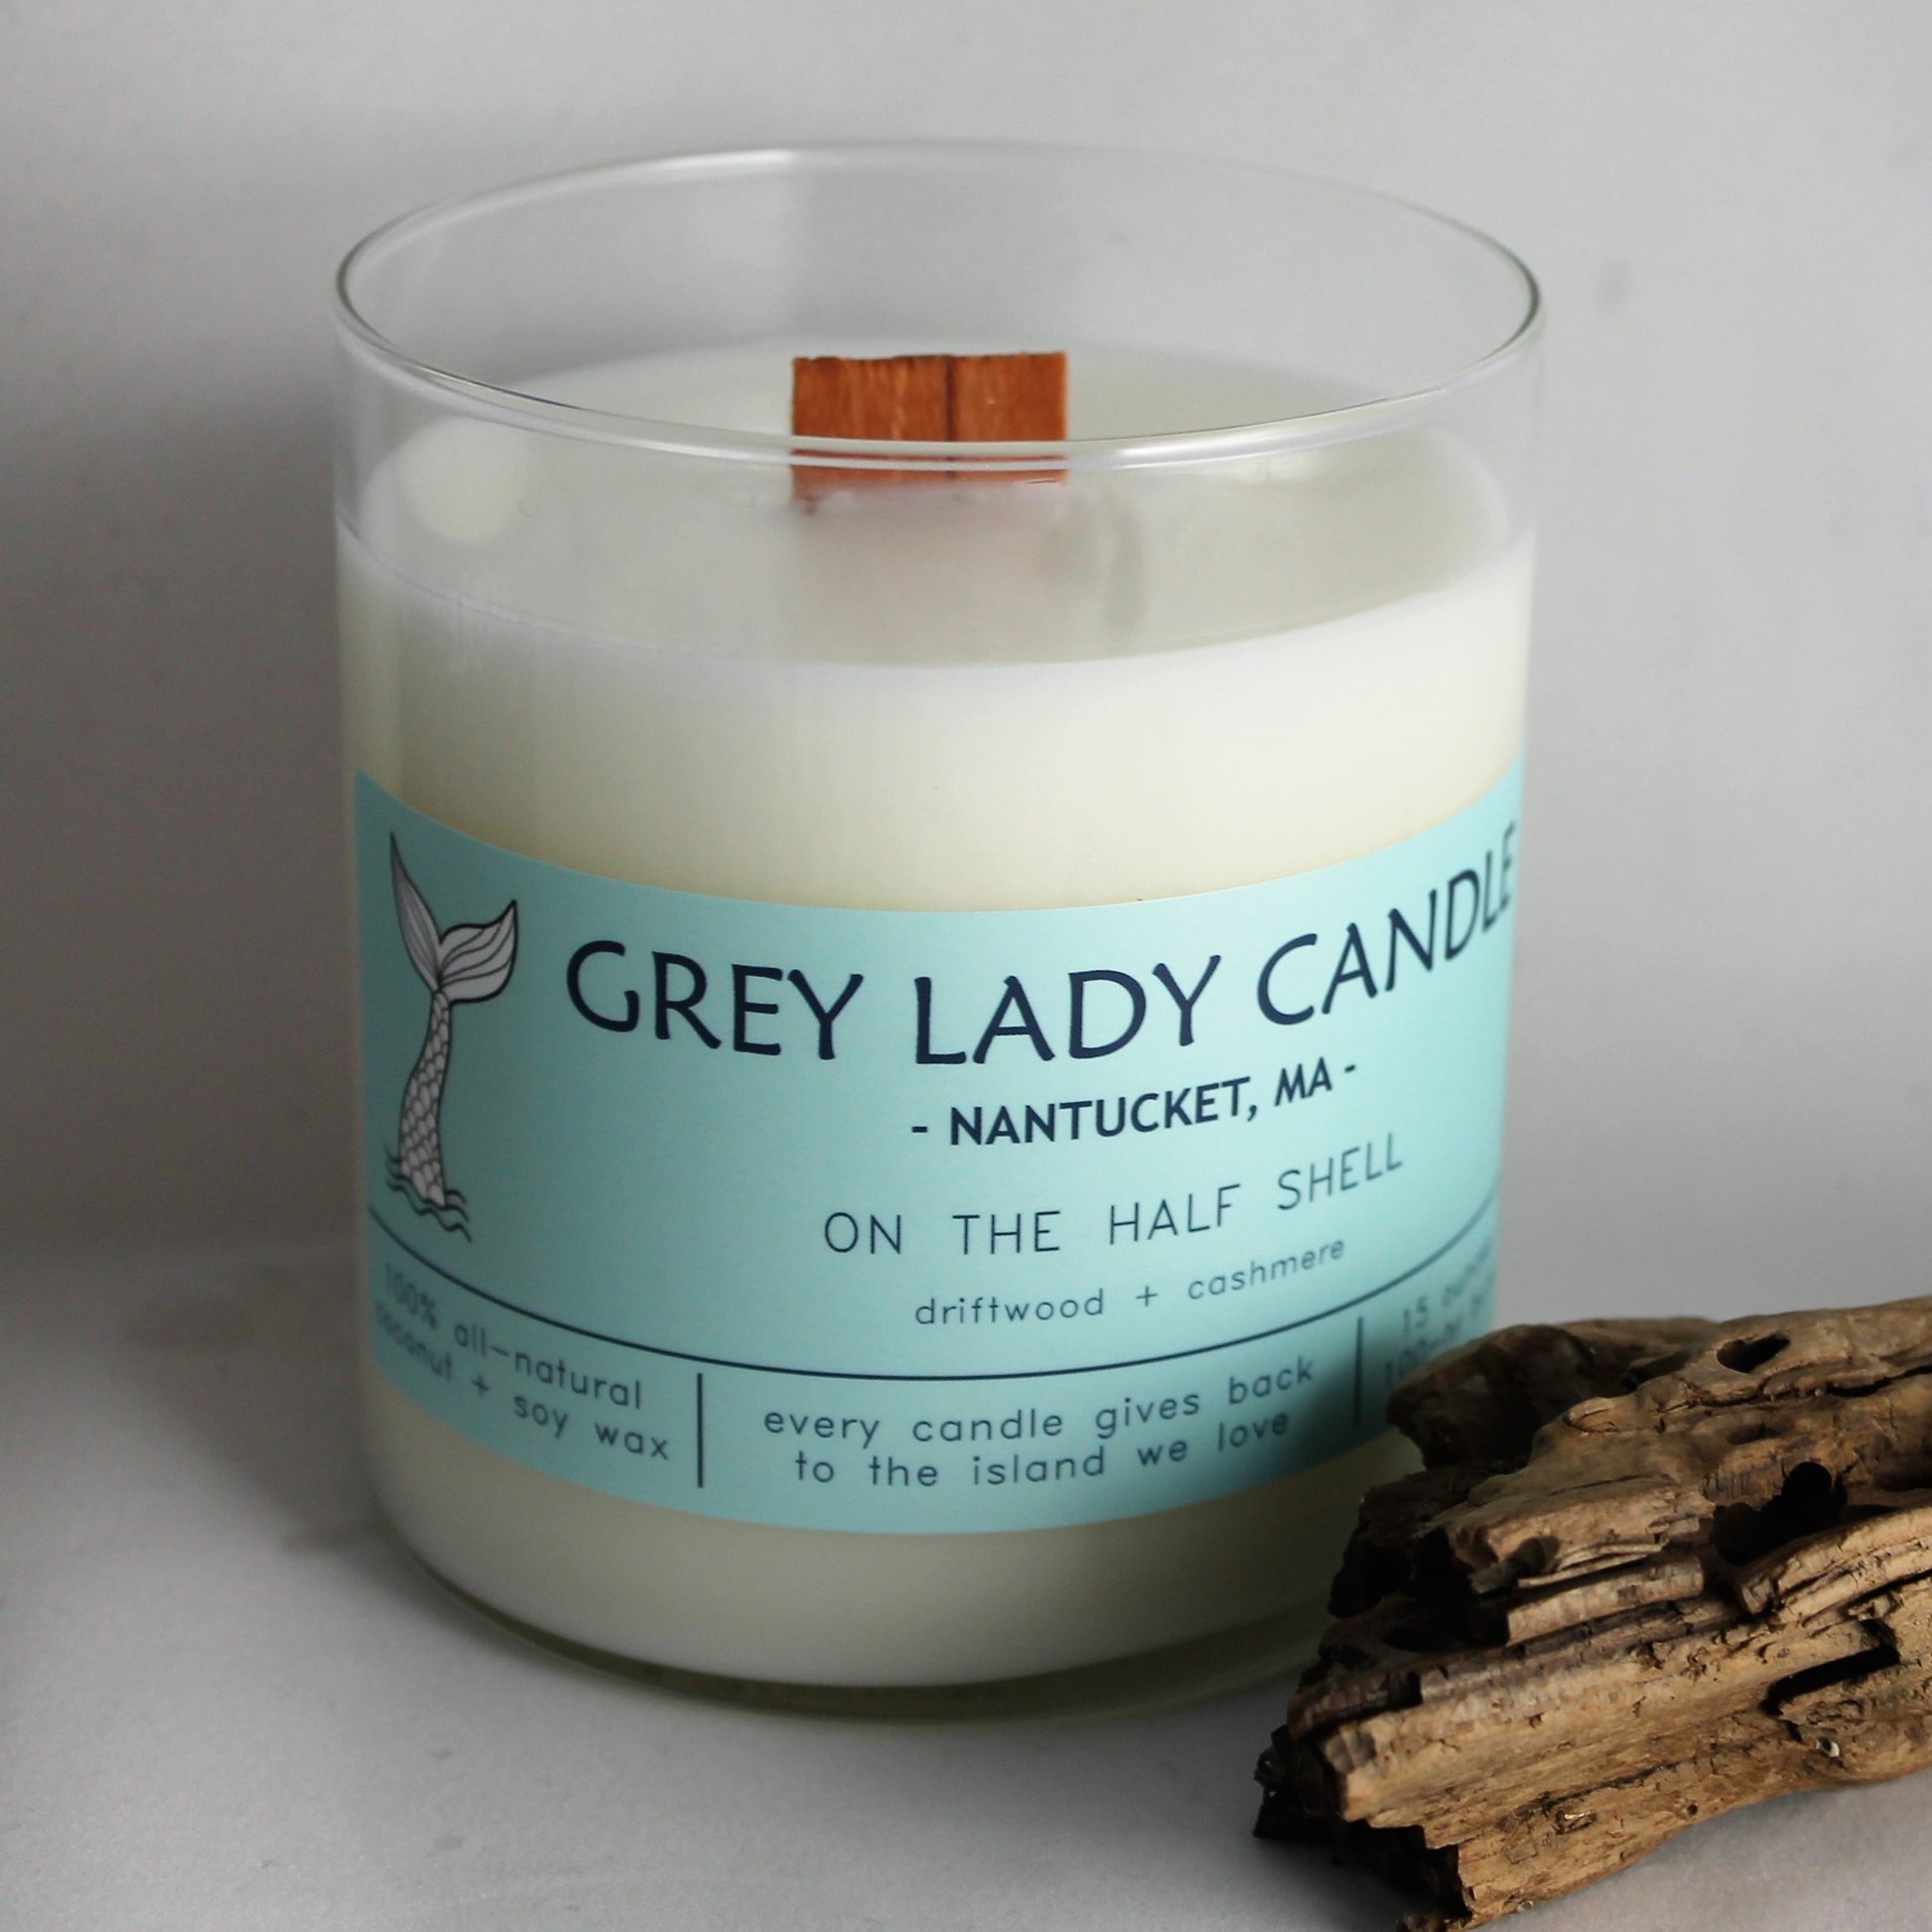 Grey Lady Candle - Nantucket, MA - On The Half Shell